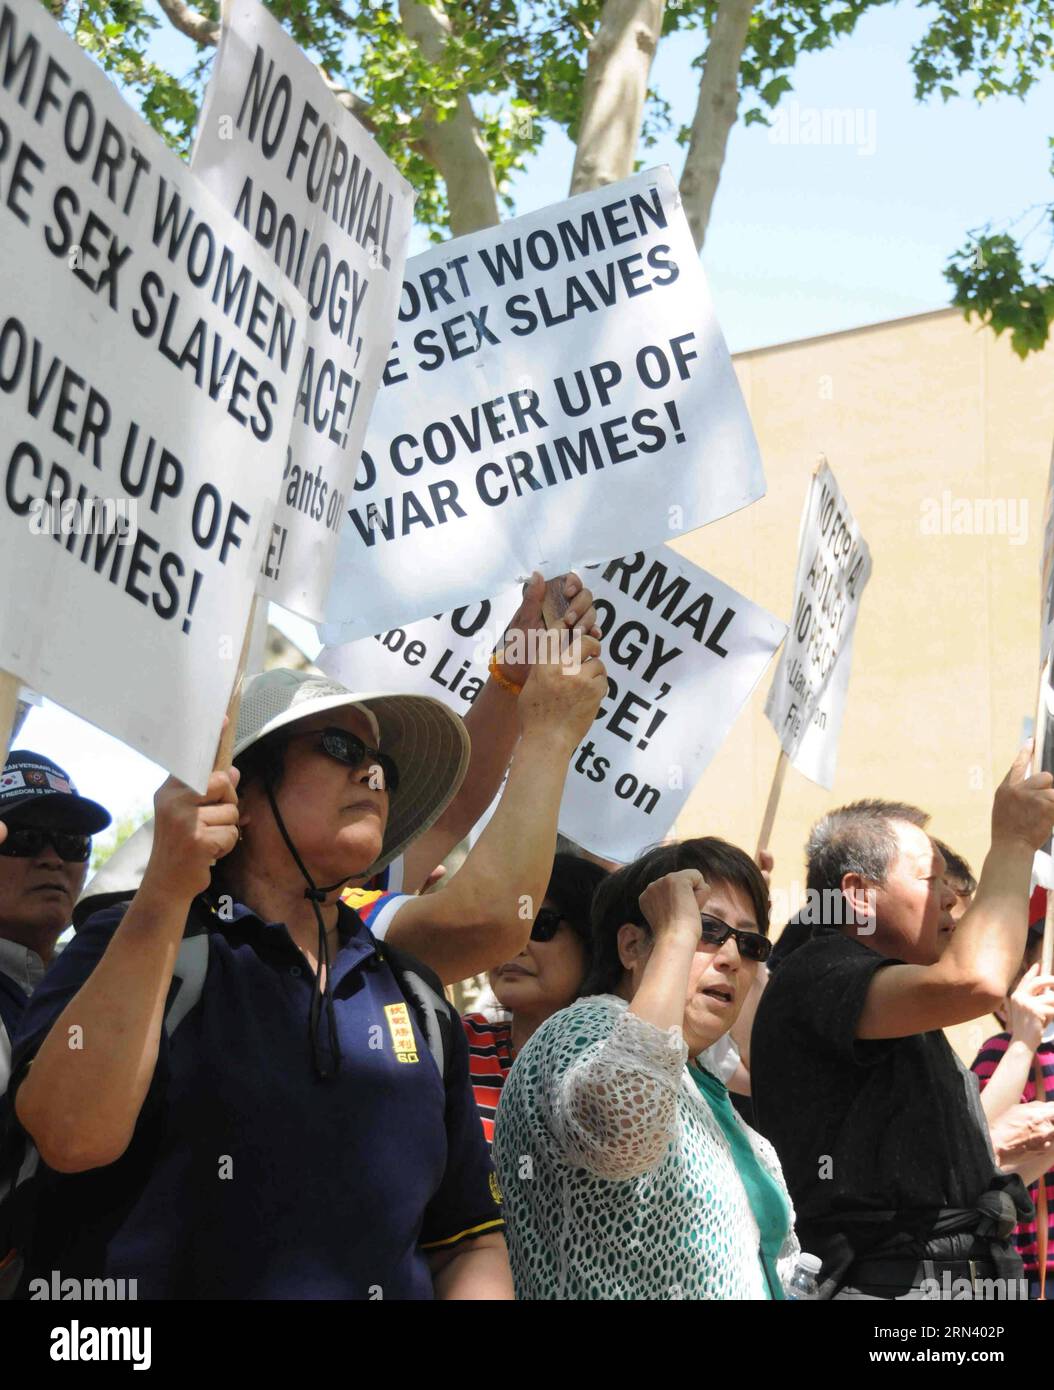 Protesters from Chinese community are seen in a demonstration against visiting Japanese Prime Minister Shinzo Abe in Stanford University, California, the United States, on April 30, 2015. Over one hundred Chinese and Korean Americans gathered outside Stanford Unviersity s Bing Concert Hall and urged visiting Japanese Prime Minister Shinzo Abe to stop distorting history when he arrived there for a speech on campus. )(azp) US-CALIFORNIA-STANDFORD-JAPAN PM-SPPECH xuxyong PUBLICATIONxNOTxINxCHN   protesters from Chinese Community are Lakes in a Demonstration against Visiting Japanese Prime Ministe Stock Photo